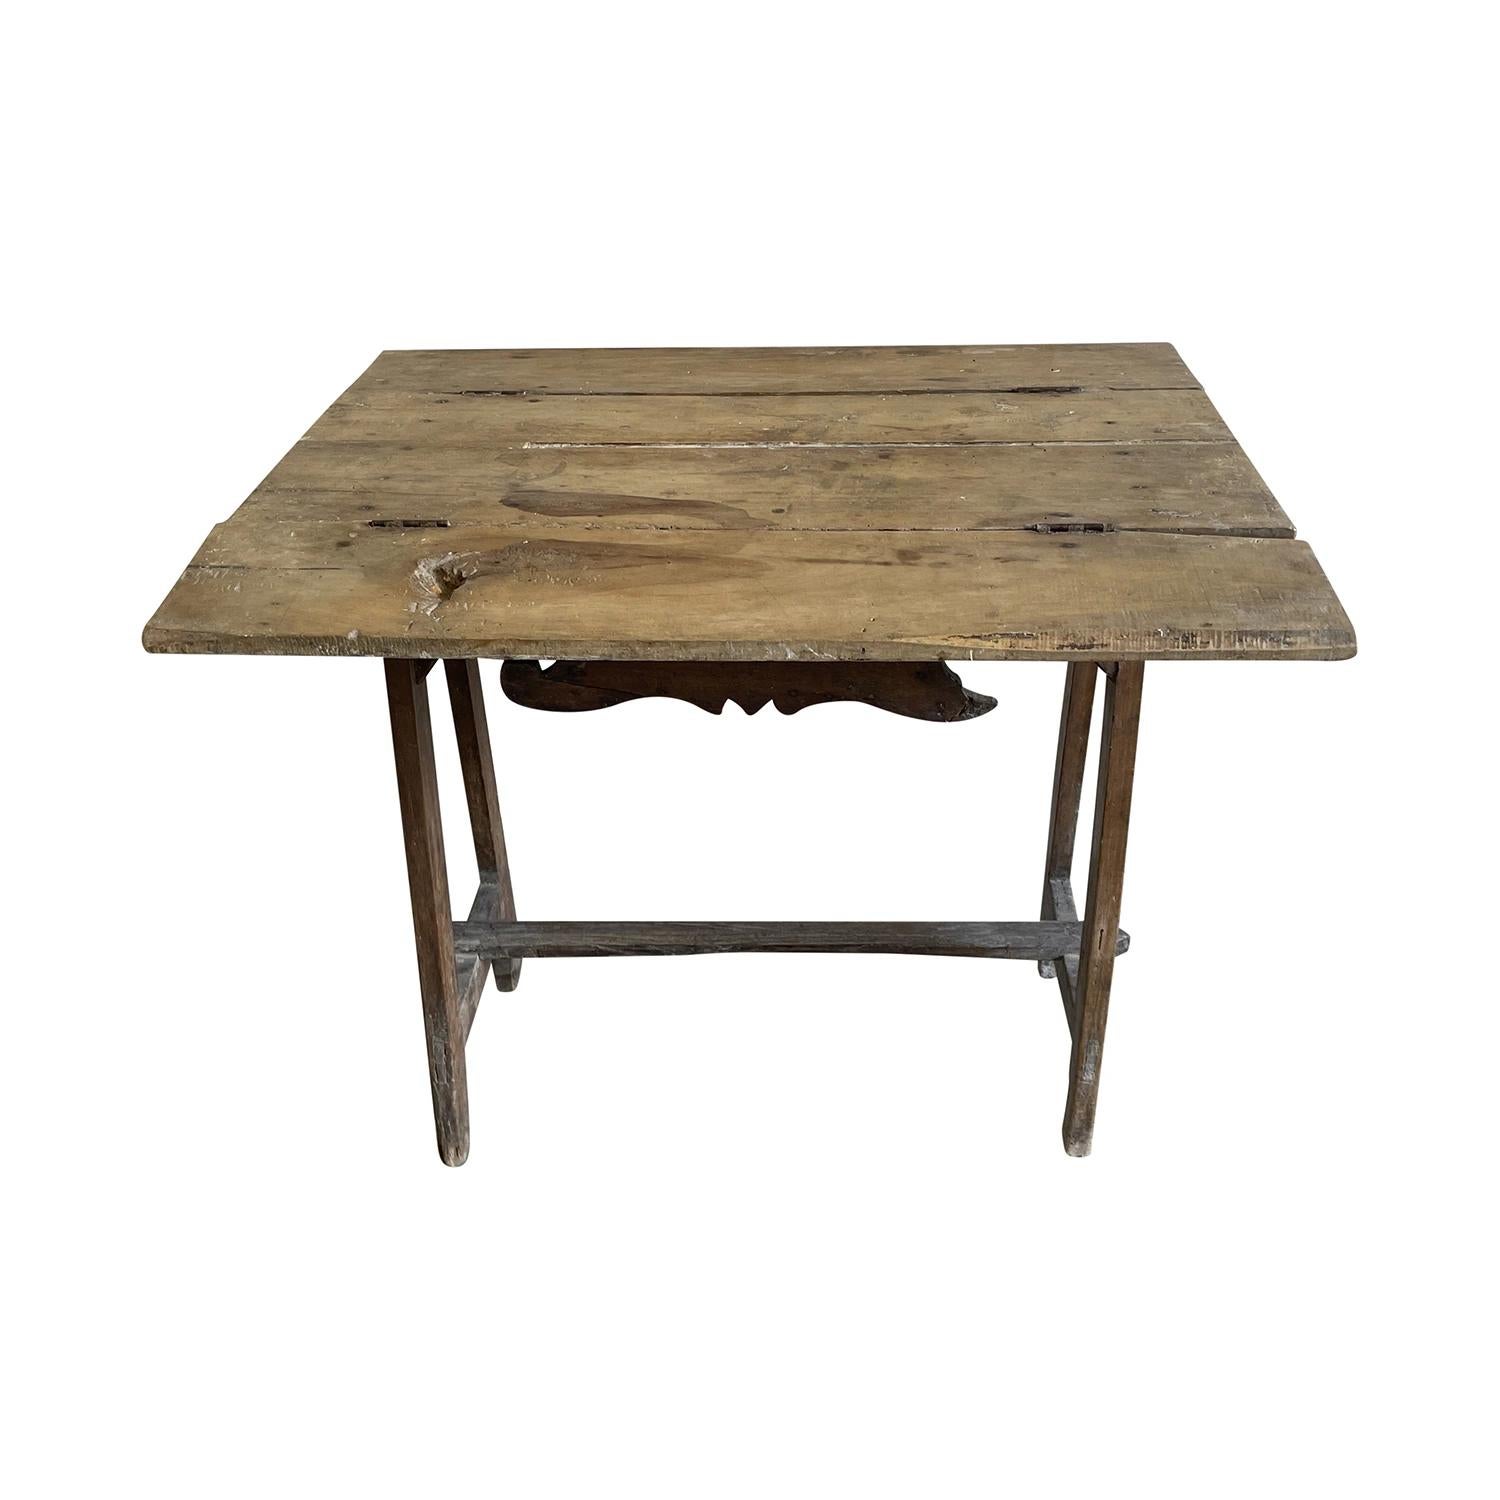 A small foldable 18th Century Tuscan Baroque side table or console has a warm rich patina, in good condition. The walnut table has a colored waxed finish. This petite Italian table has an elaborated design with a small drawer. The charming side